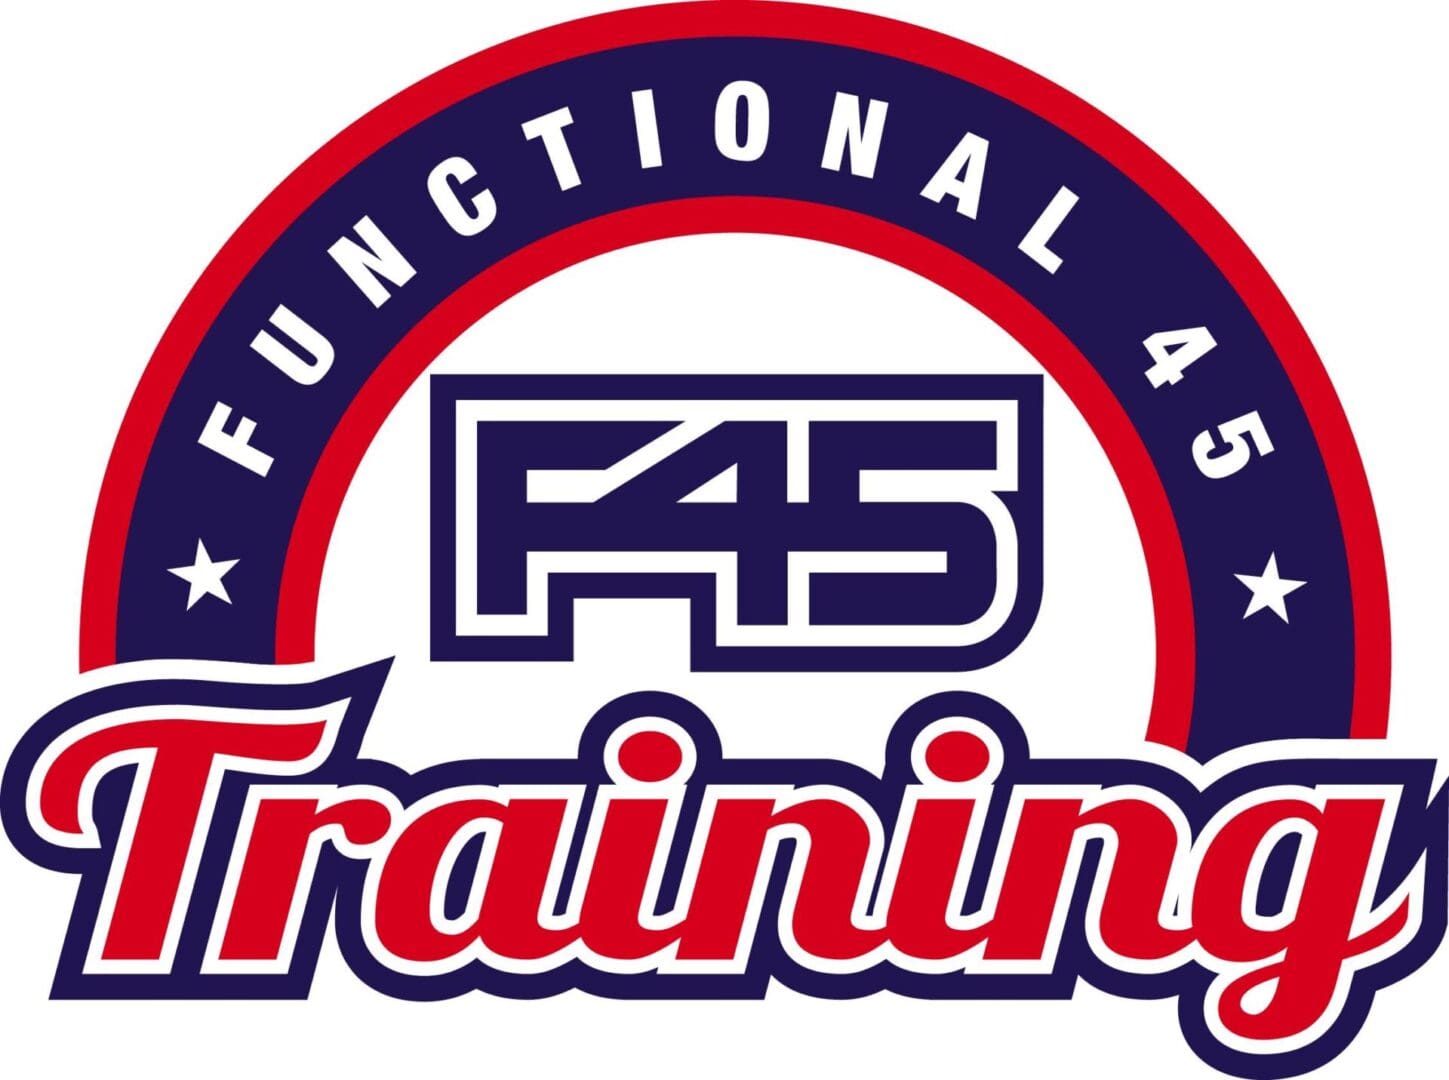 A logo for functional 4 5 training